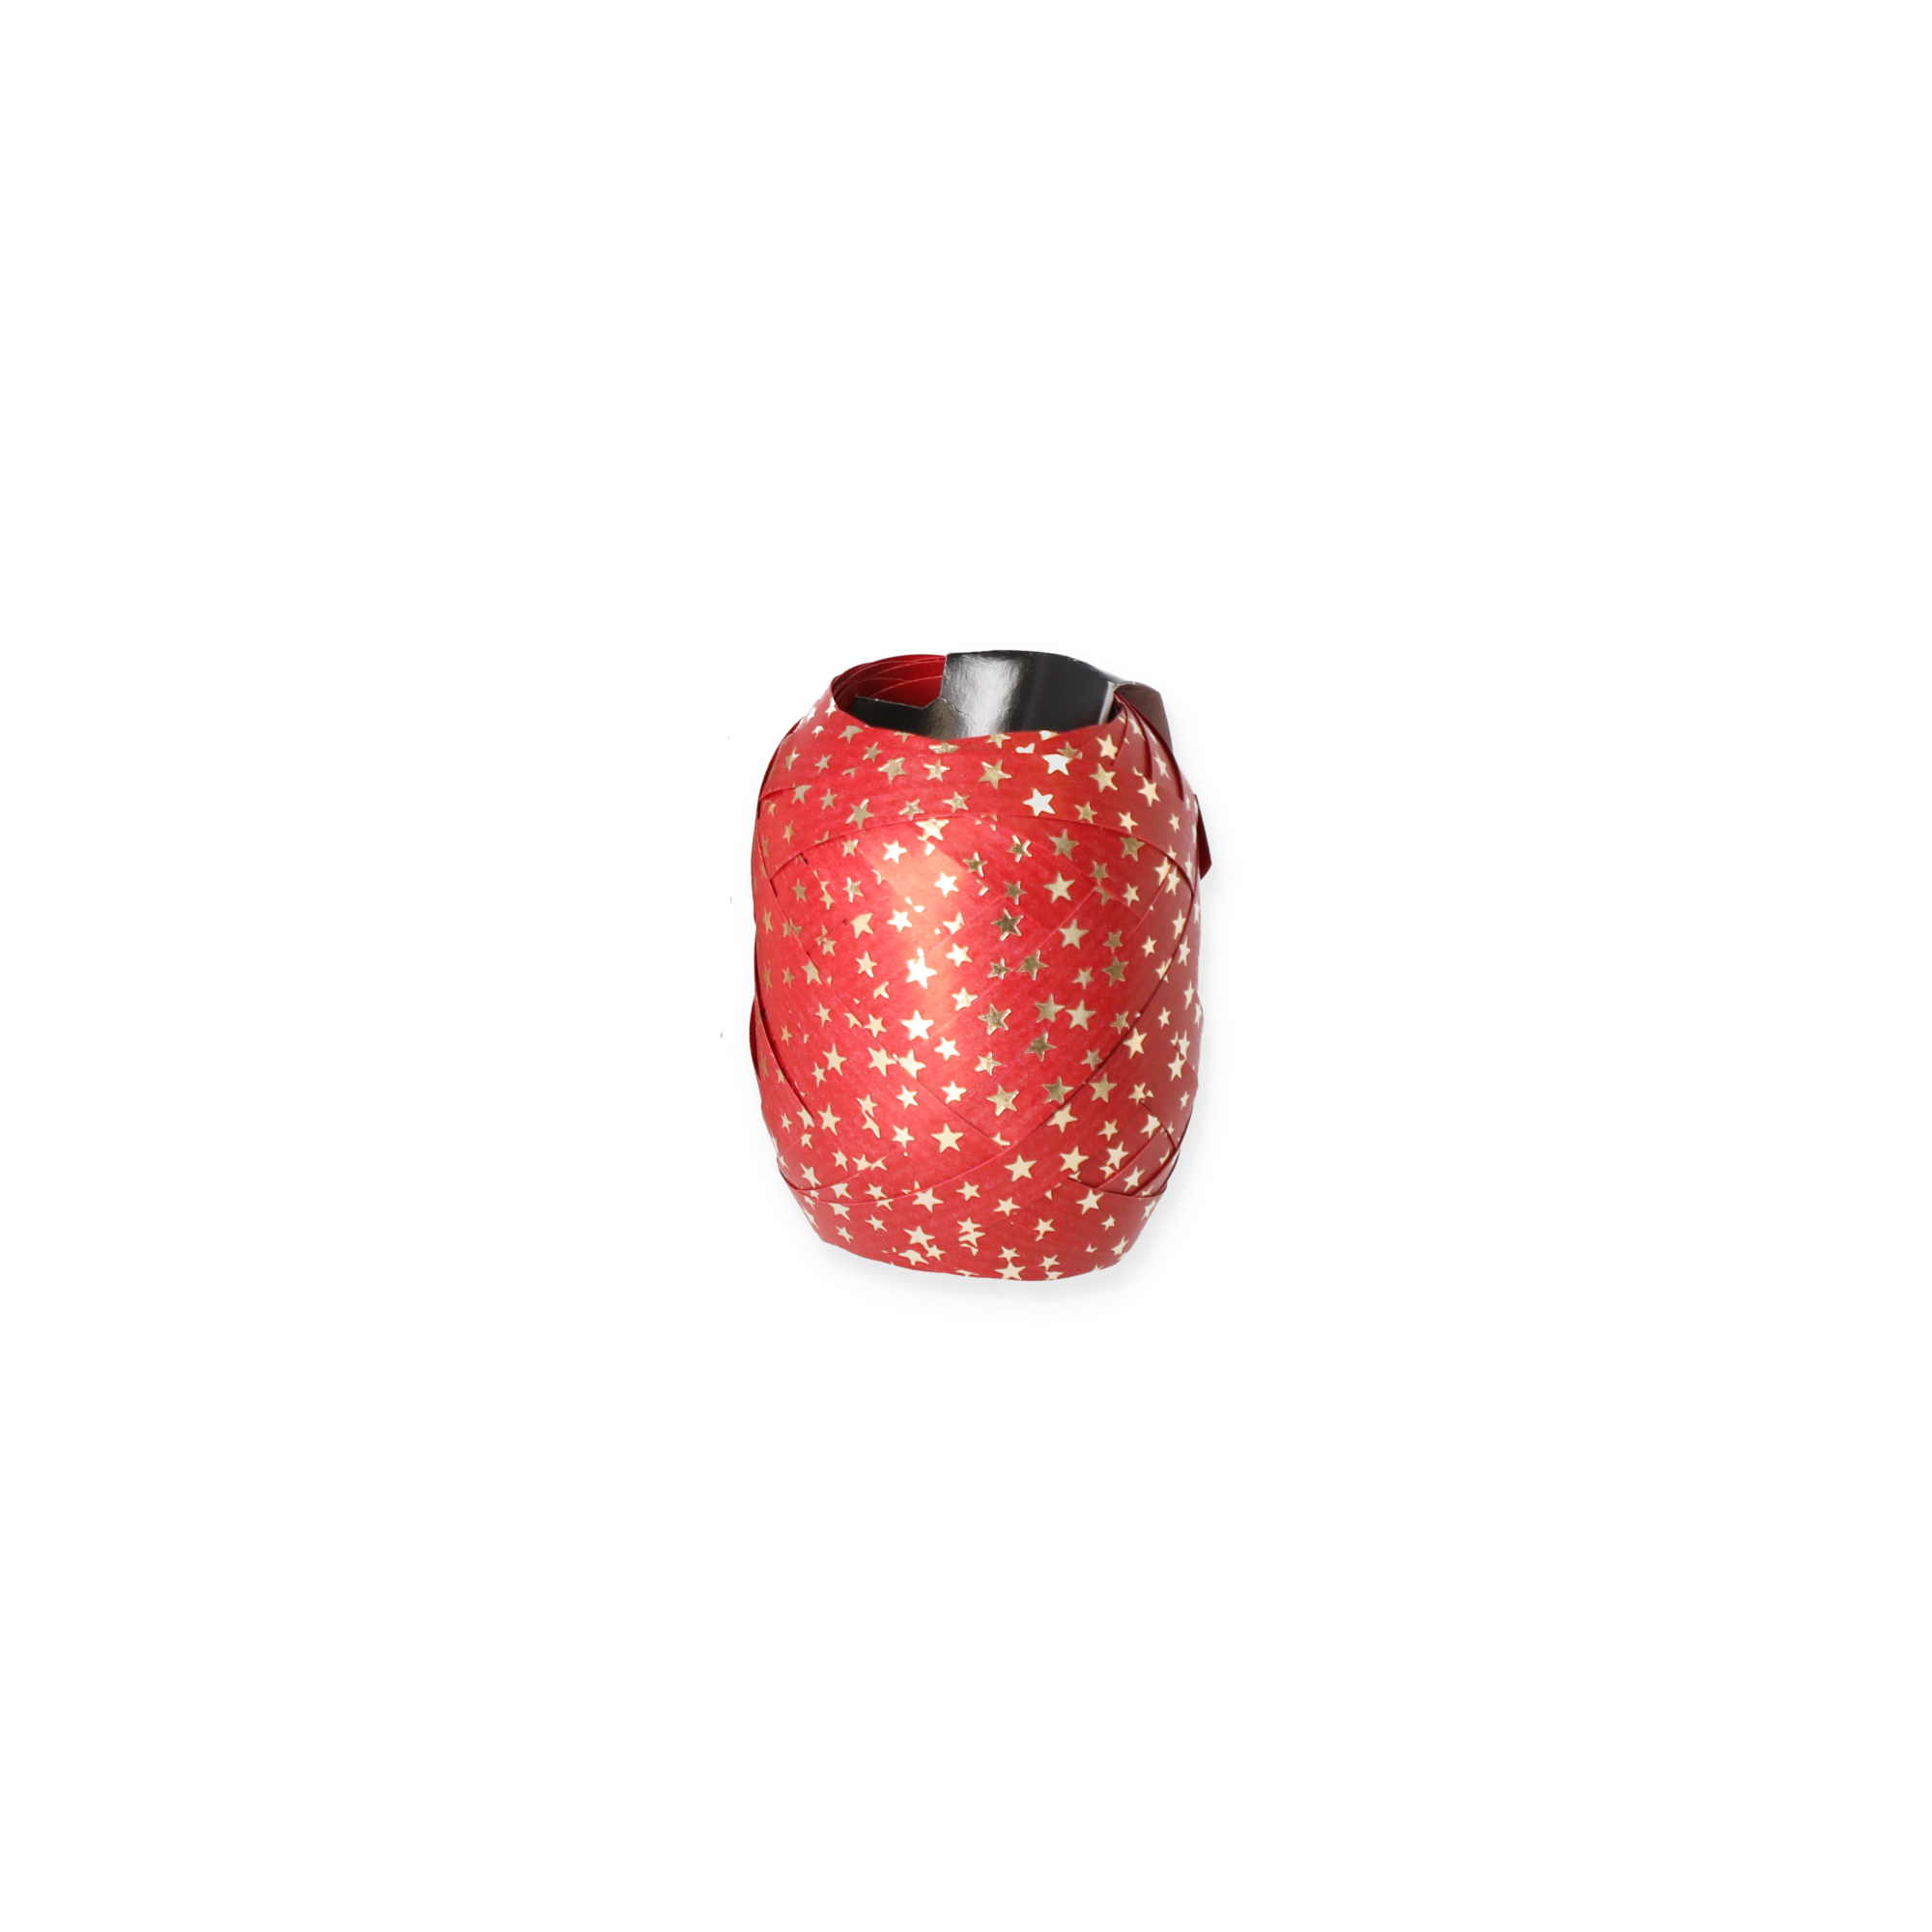 Geschenkband 'Nature Pack Stars' Baumwolle rot/gold 12 m + product picture